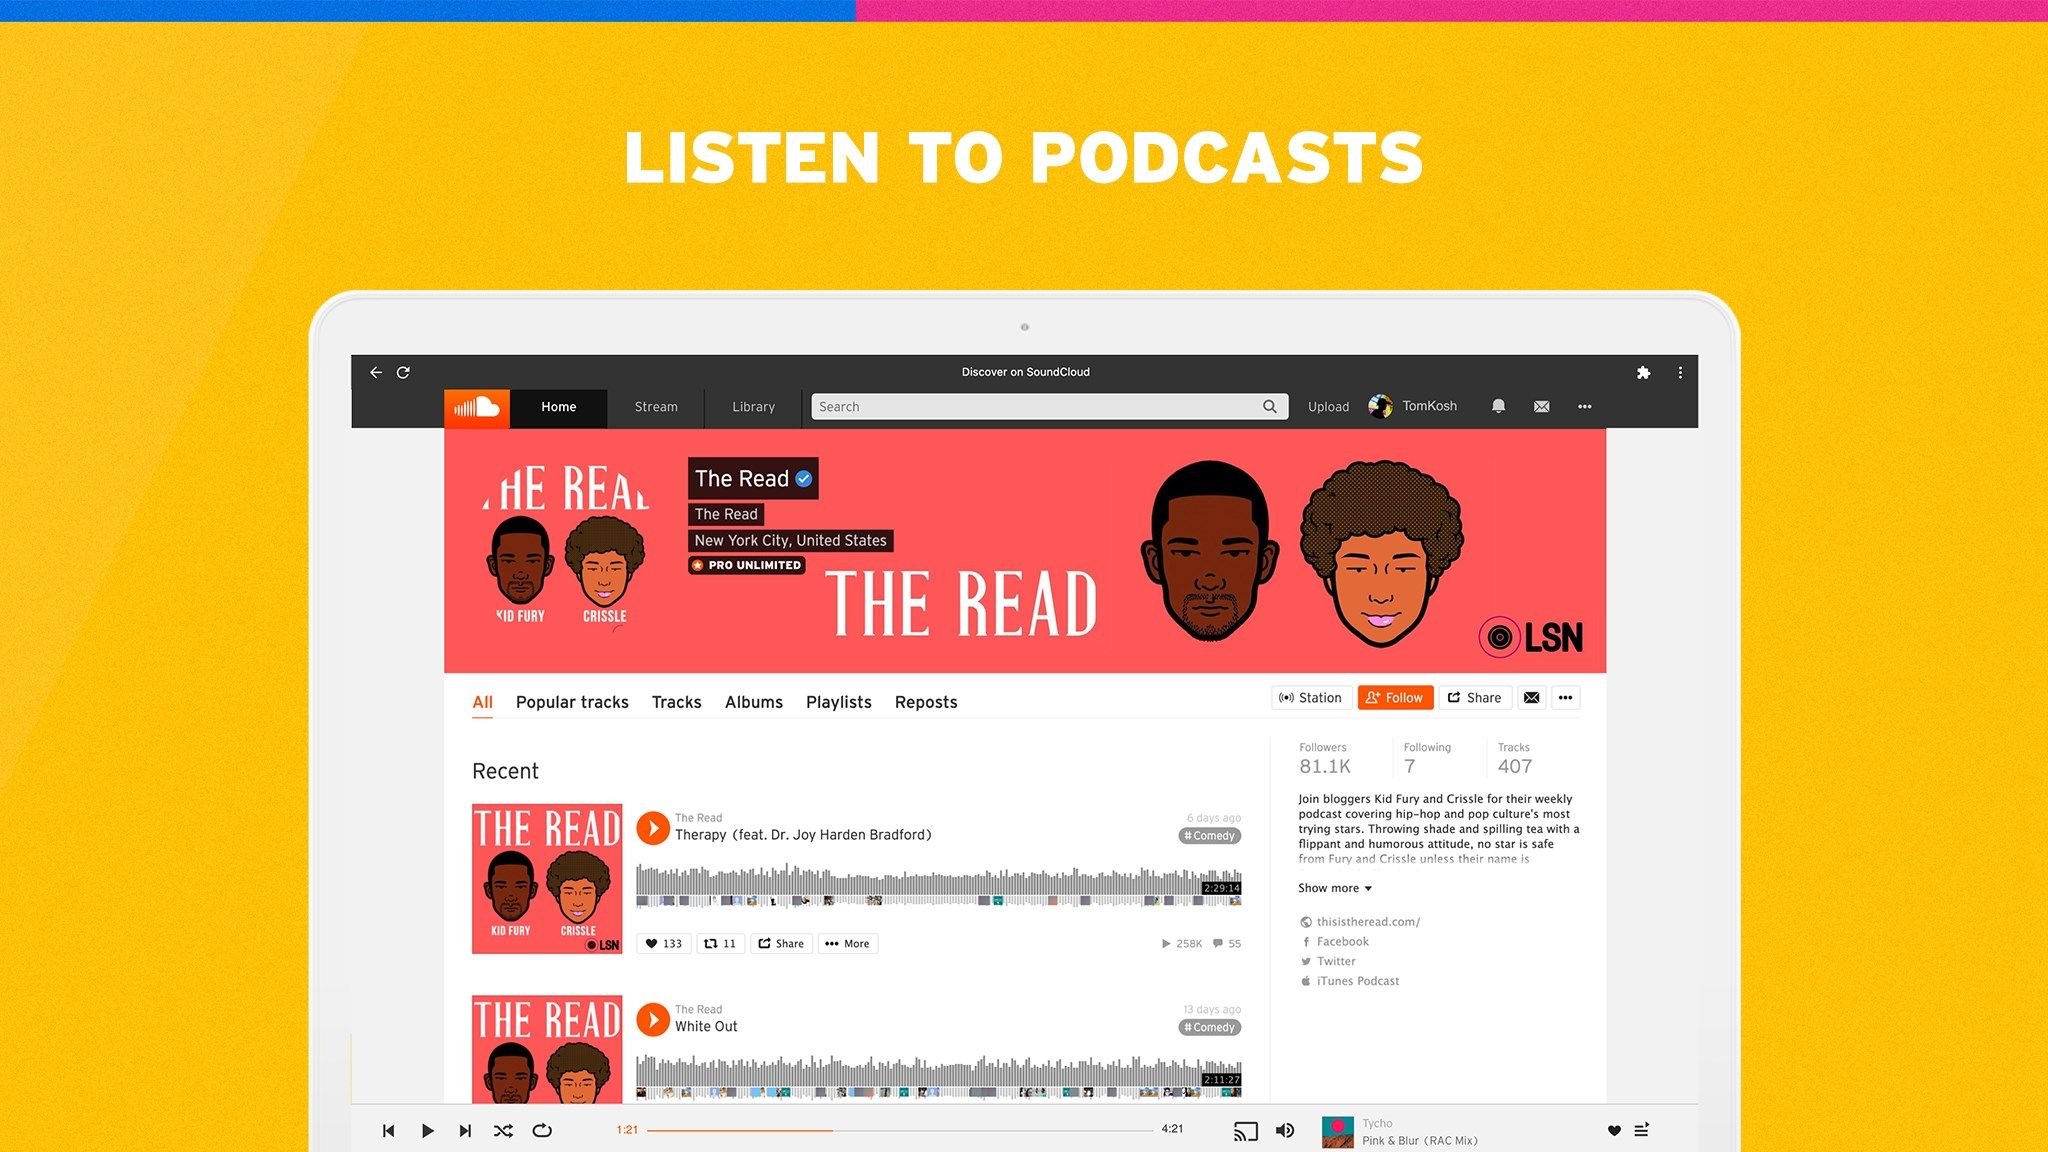 Listen to podcasts